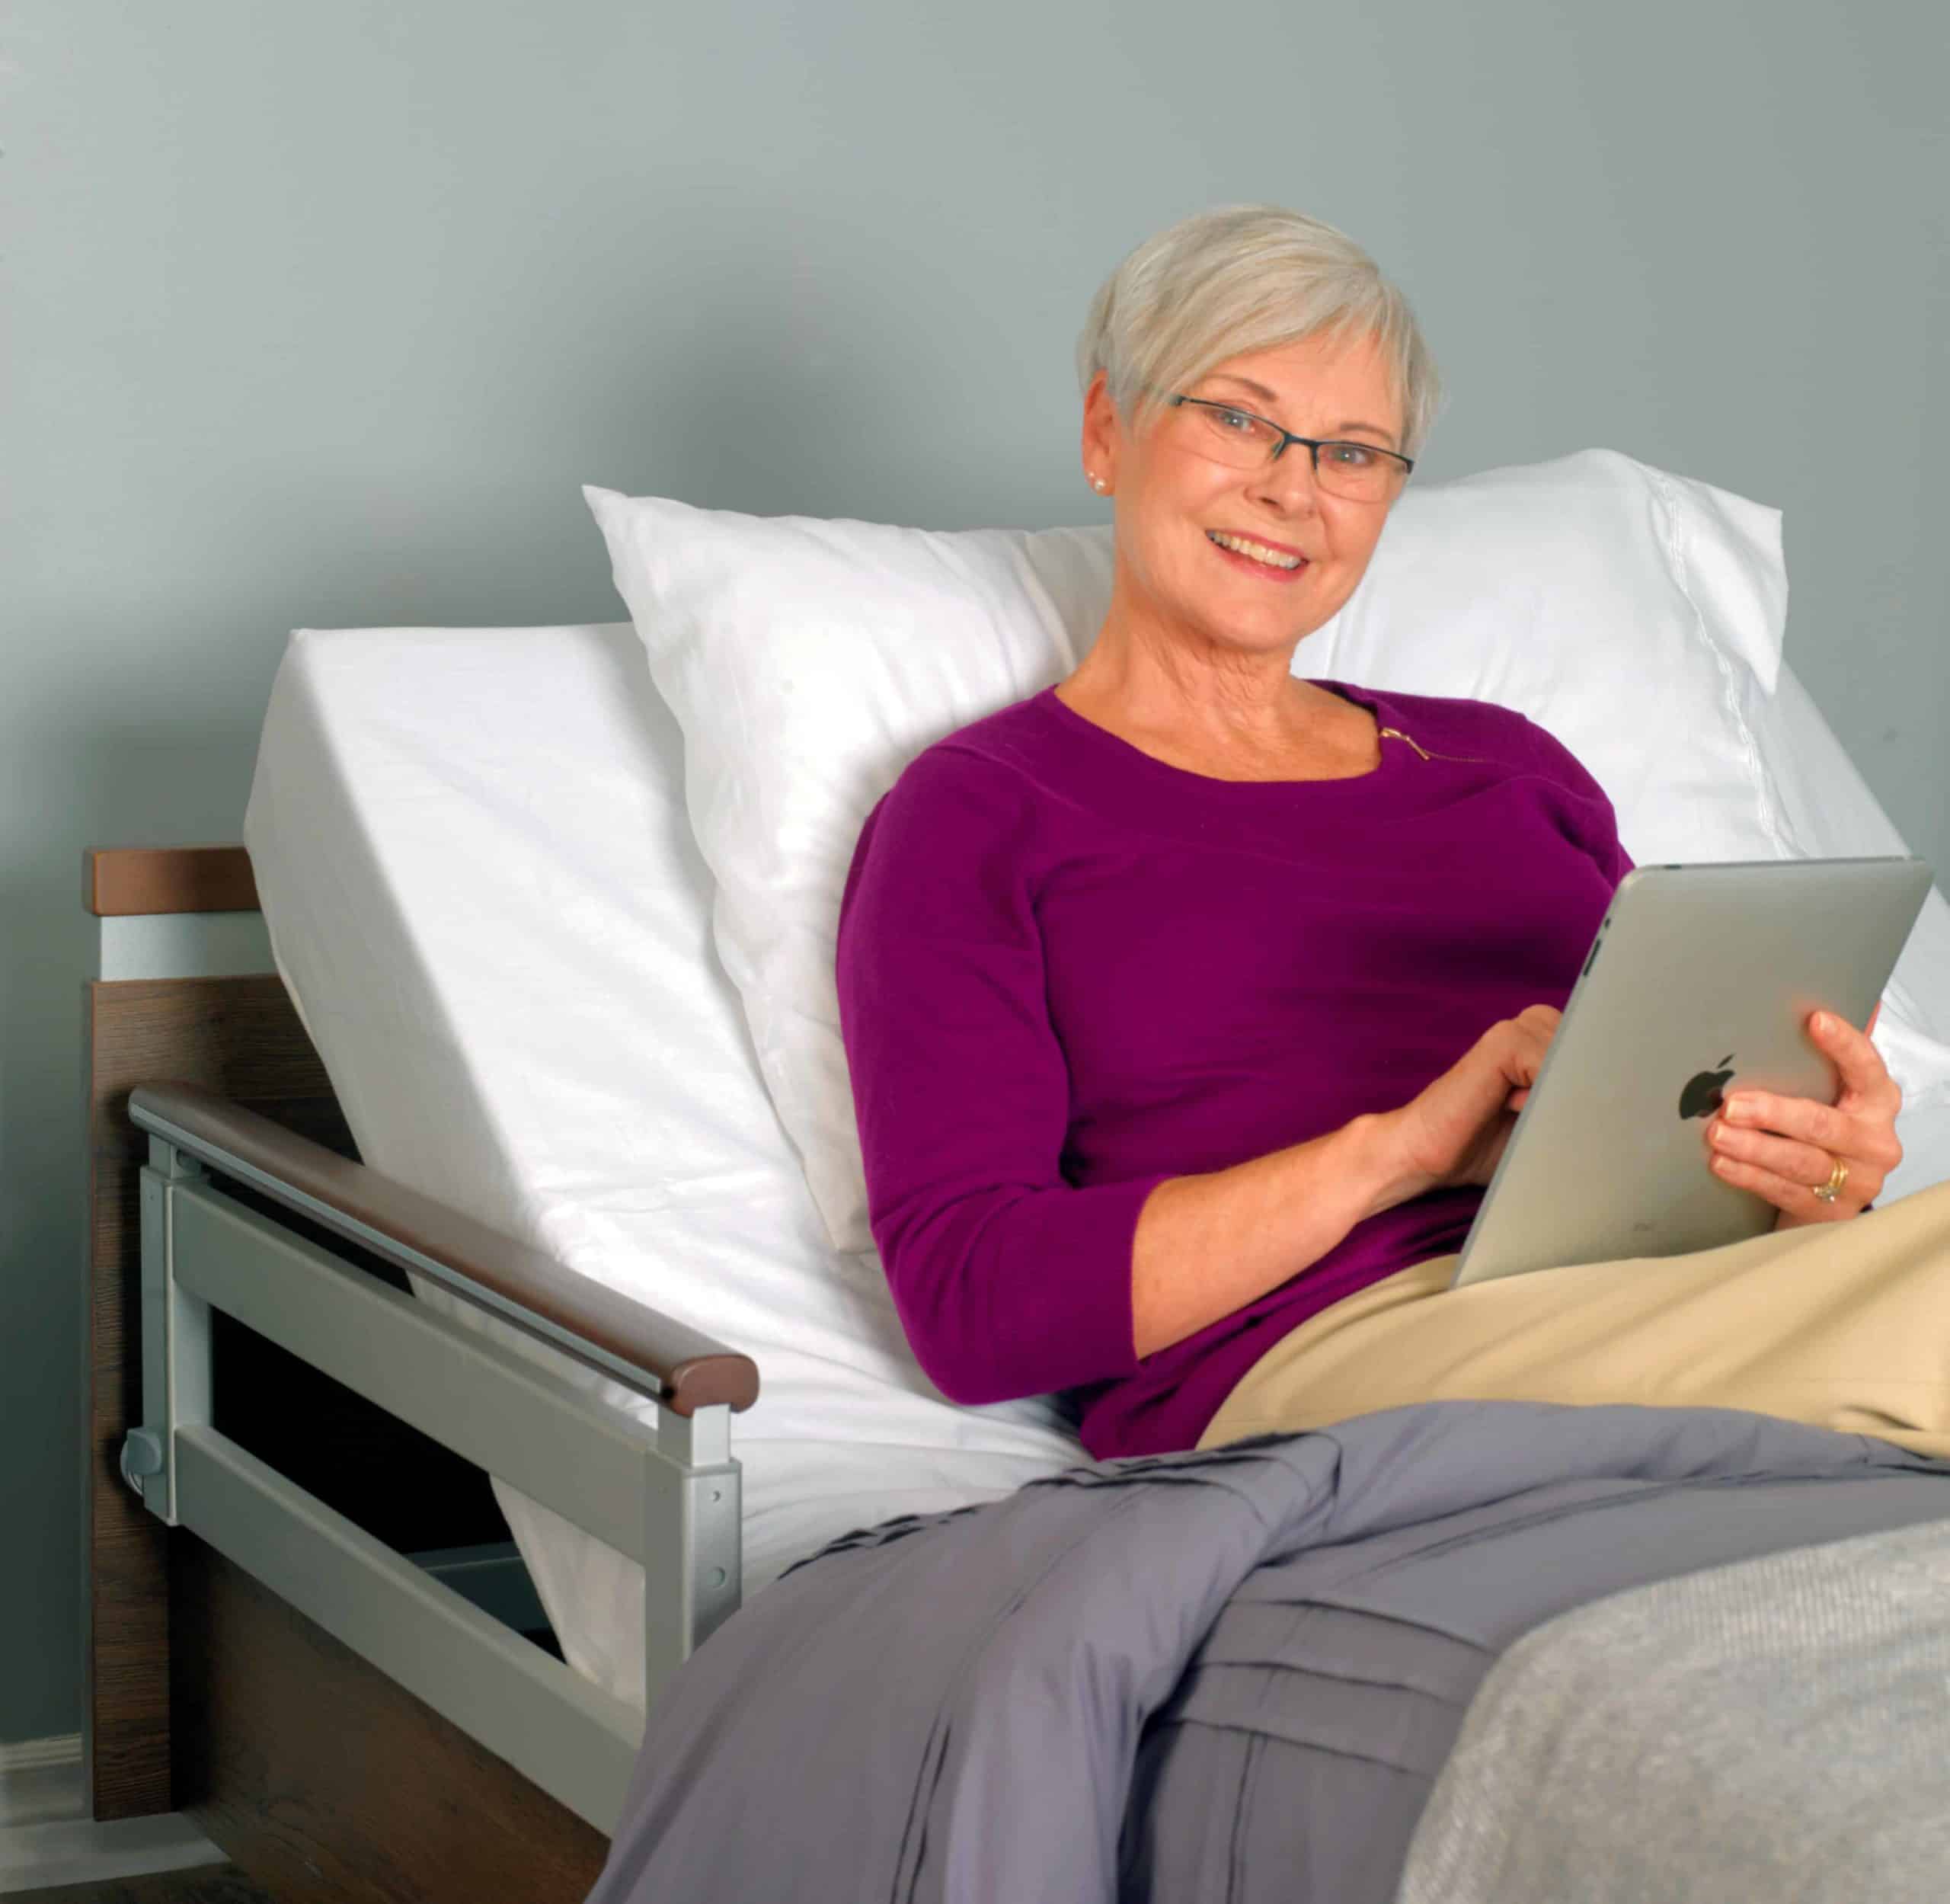 a woman sitting on a bed with a tablet.